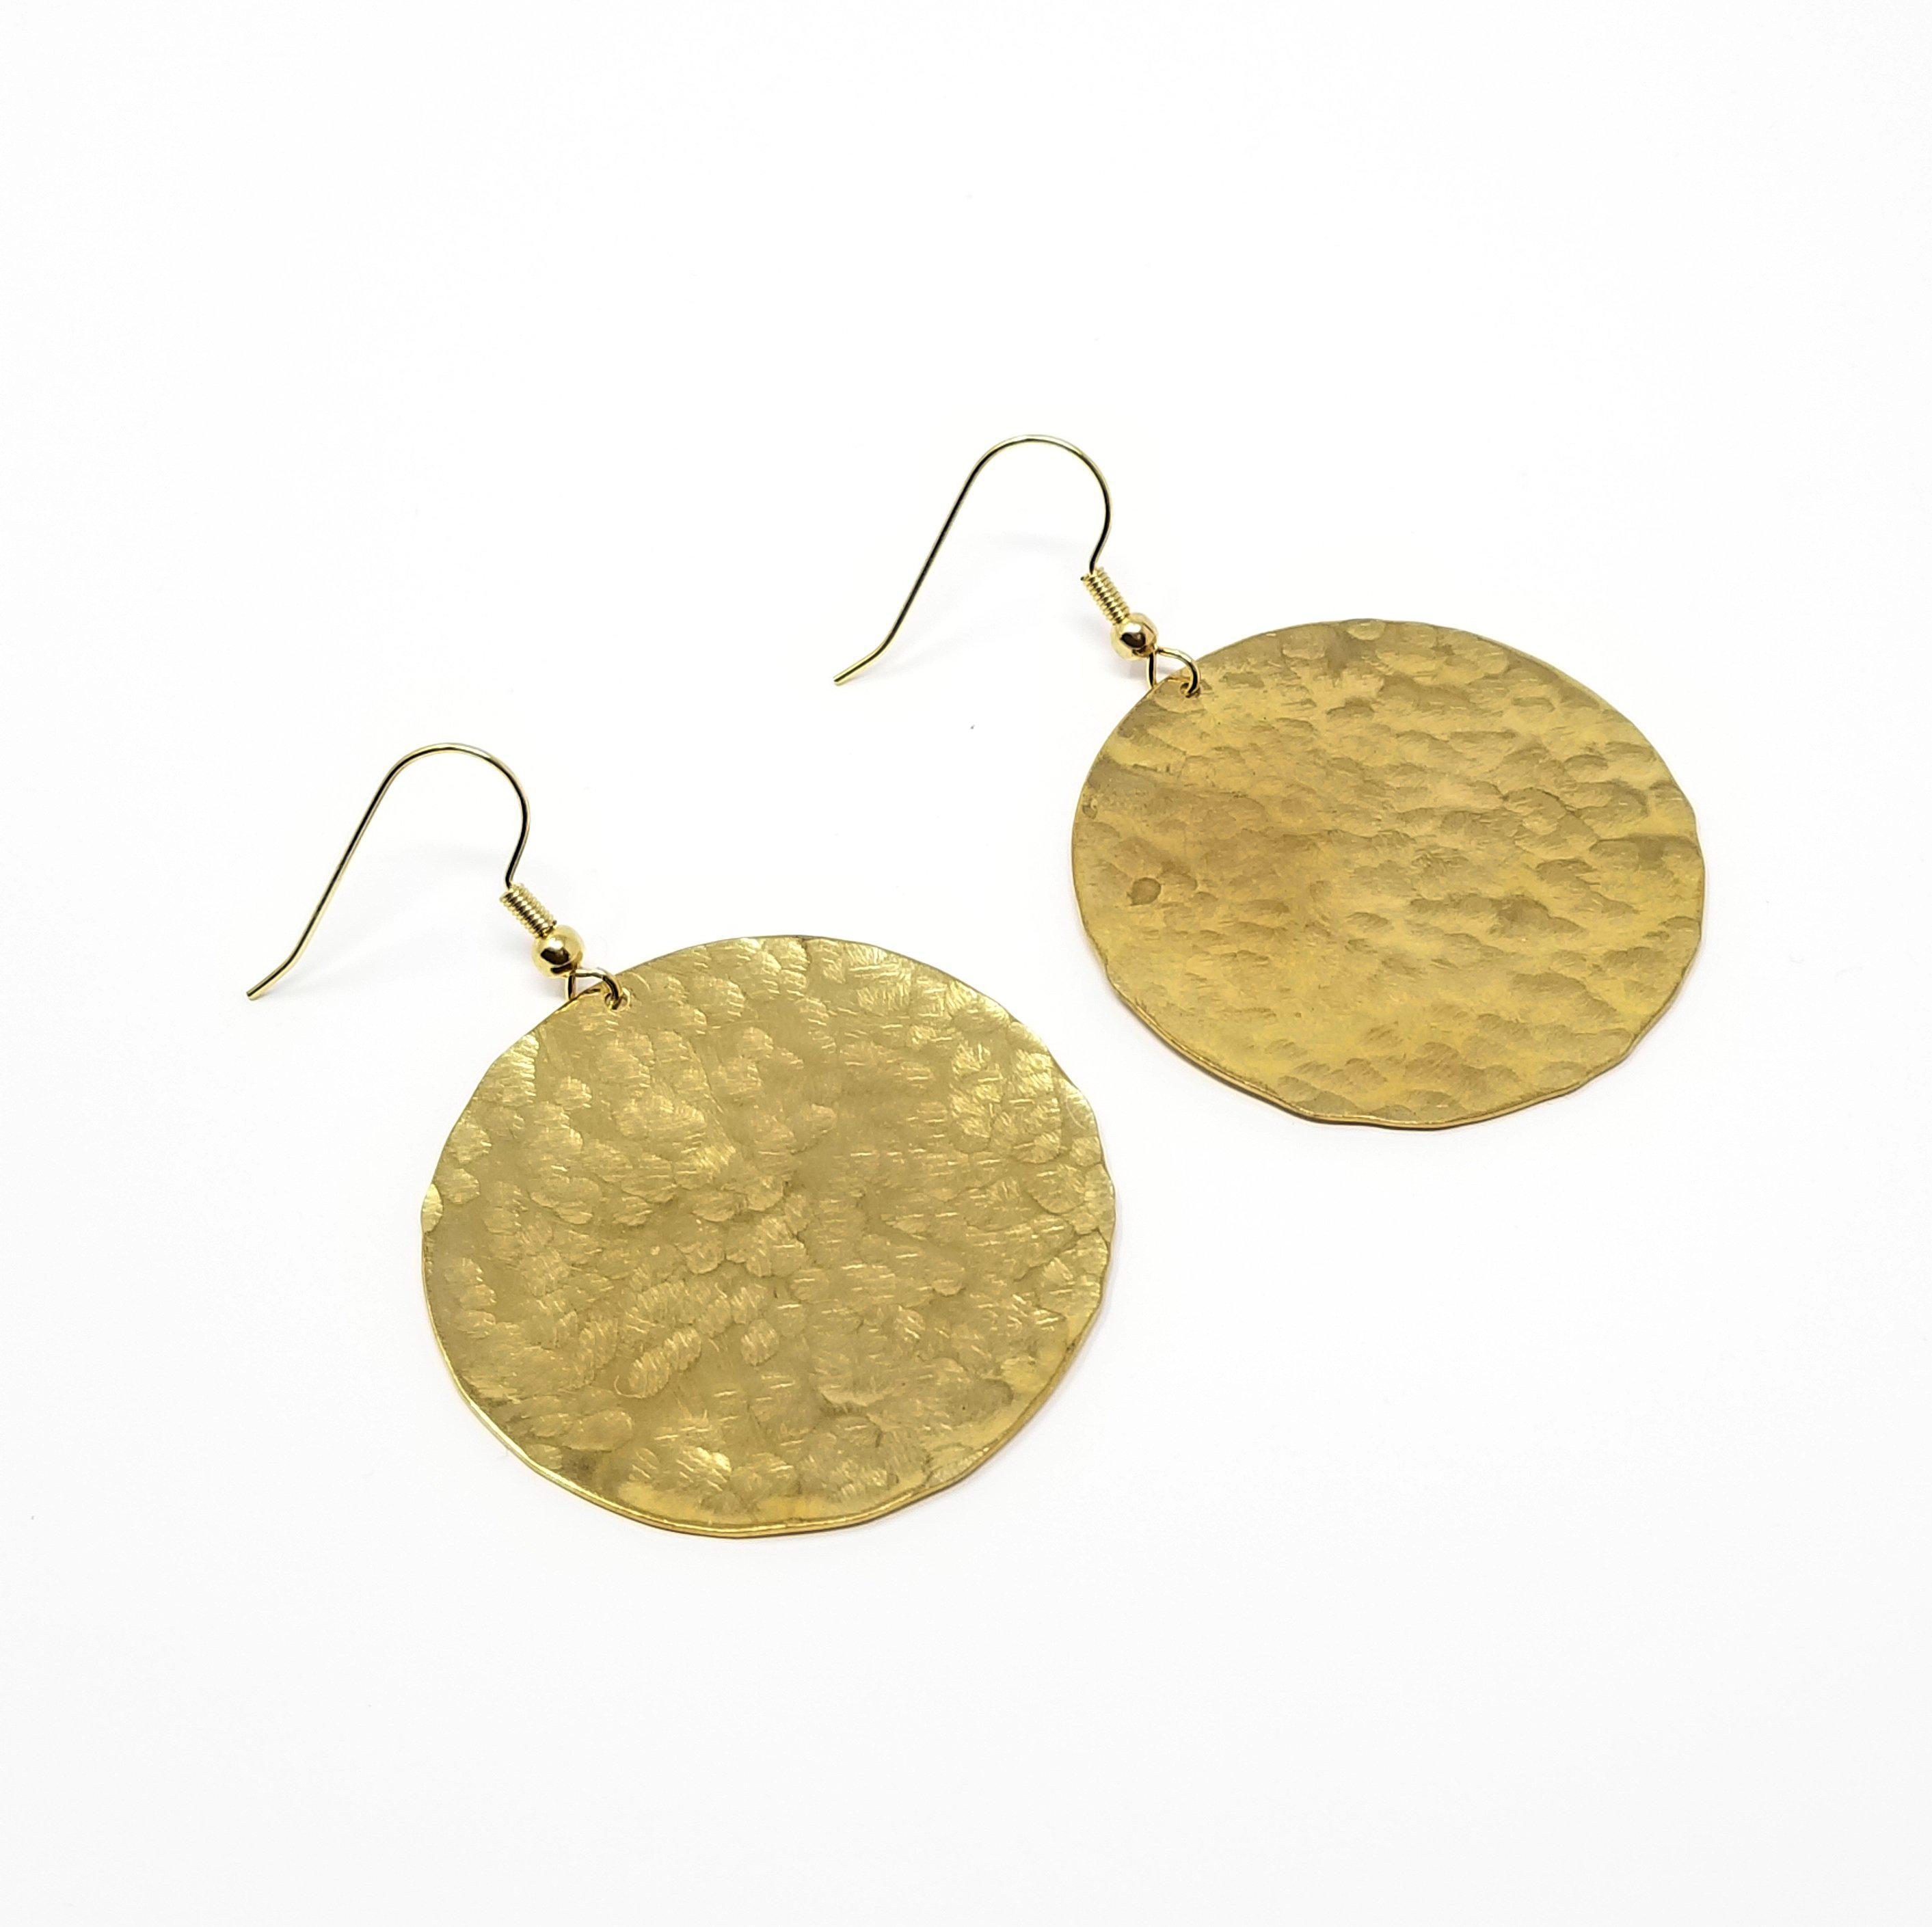 Full Moon 2 - Recycled Brass Textured Earrings